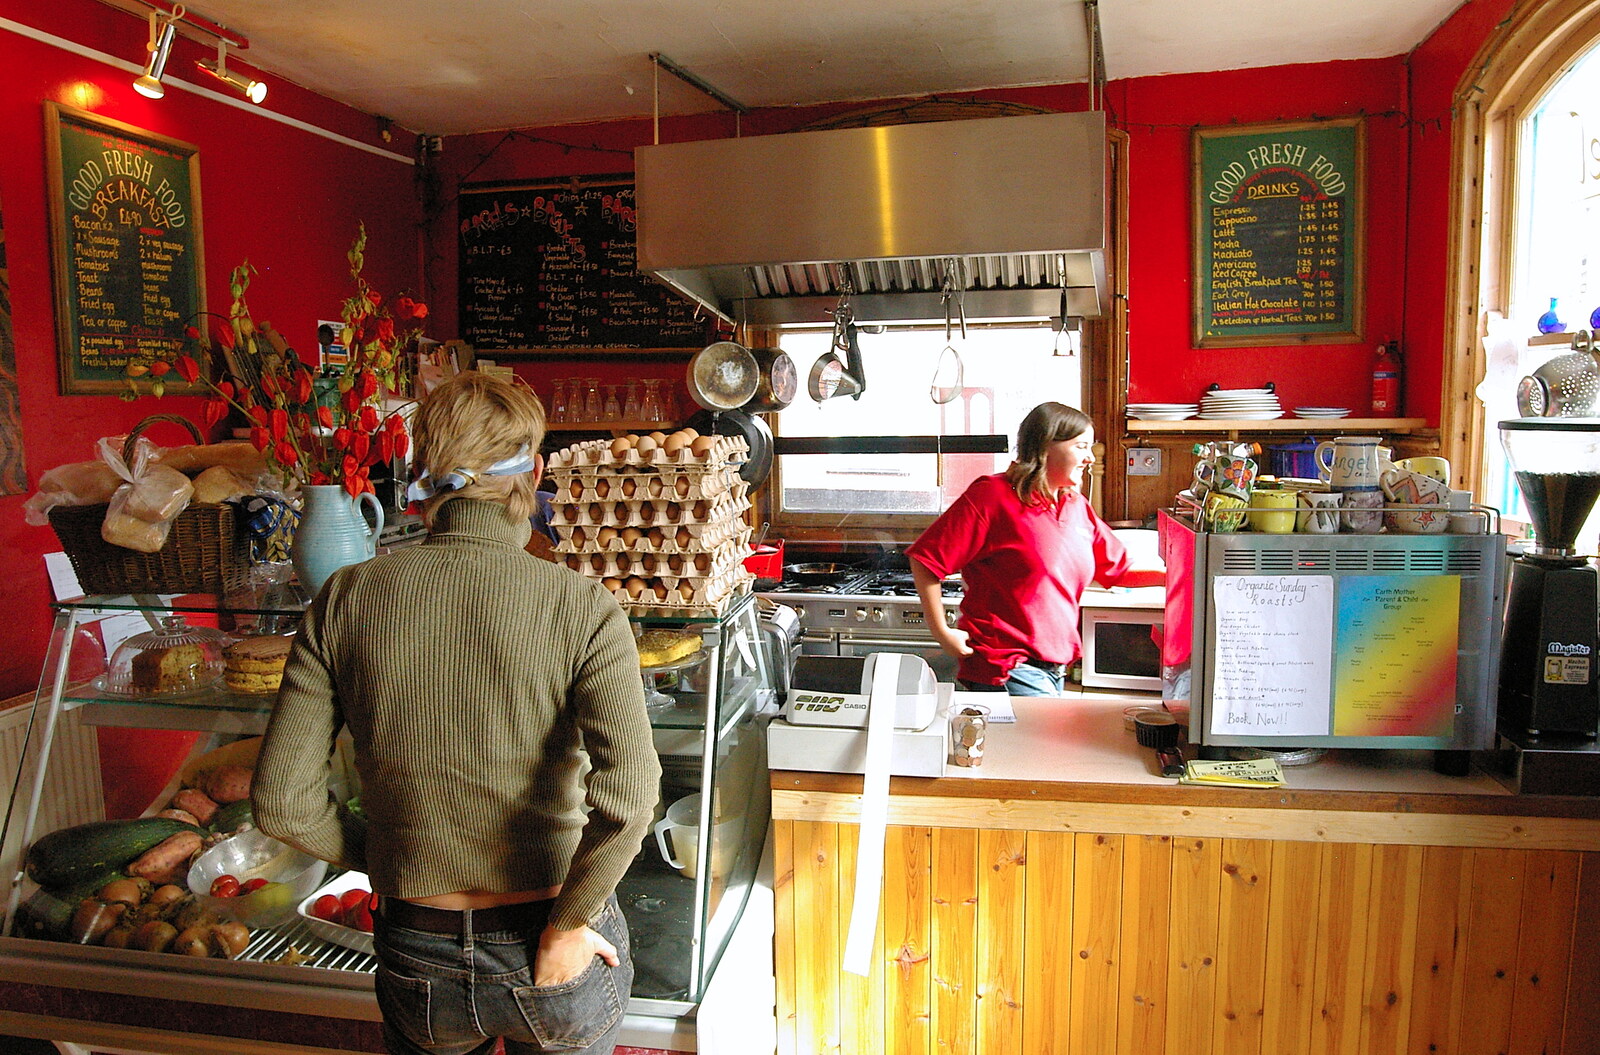 Inside the Angel Café from Sam and Daisy at the Angel Café, Diss, Norfolk - 17th September 2005